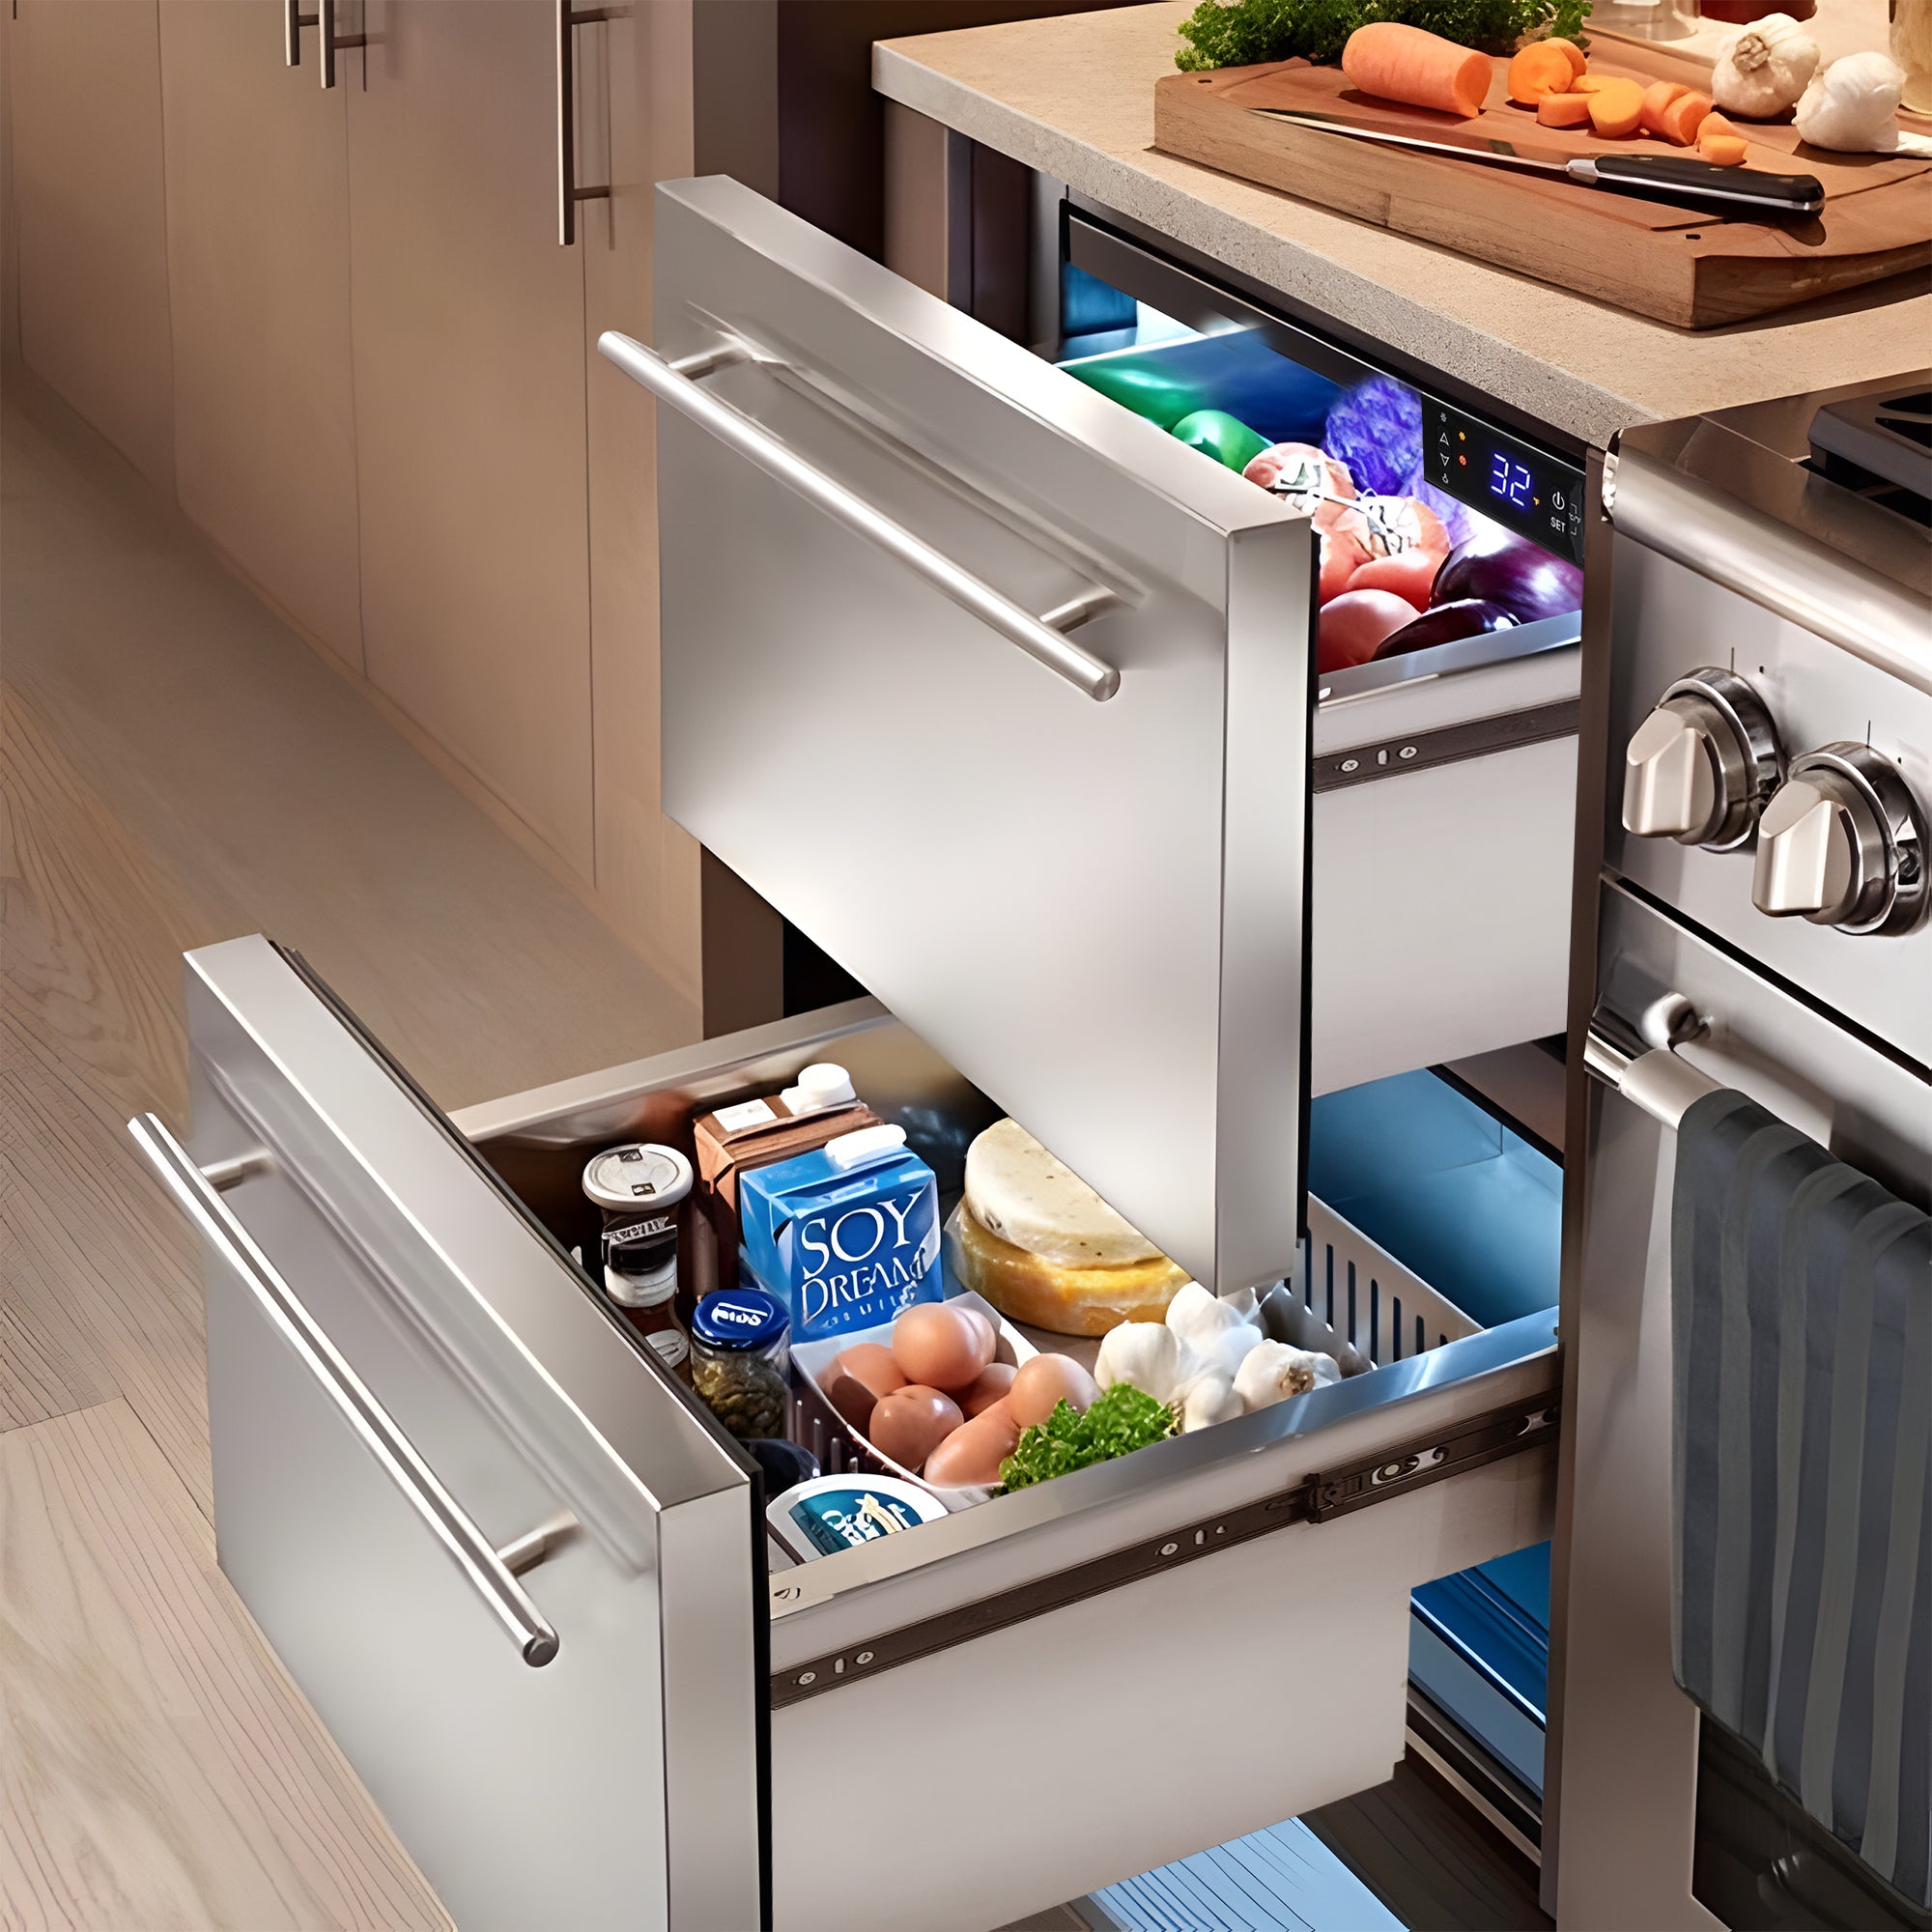 Side view of a 5.12 Cu Ft Outdoor Refrigerator with Drawer Design 160 cans installed in a kitchen setup. The pulled-out drawers reveal food and beverages stored inside, accompanied by a digital temperature control panel